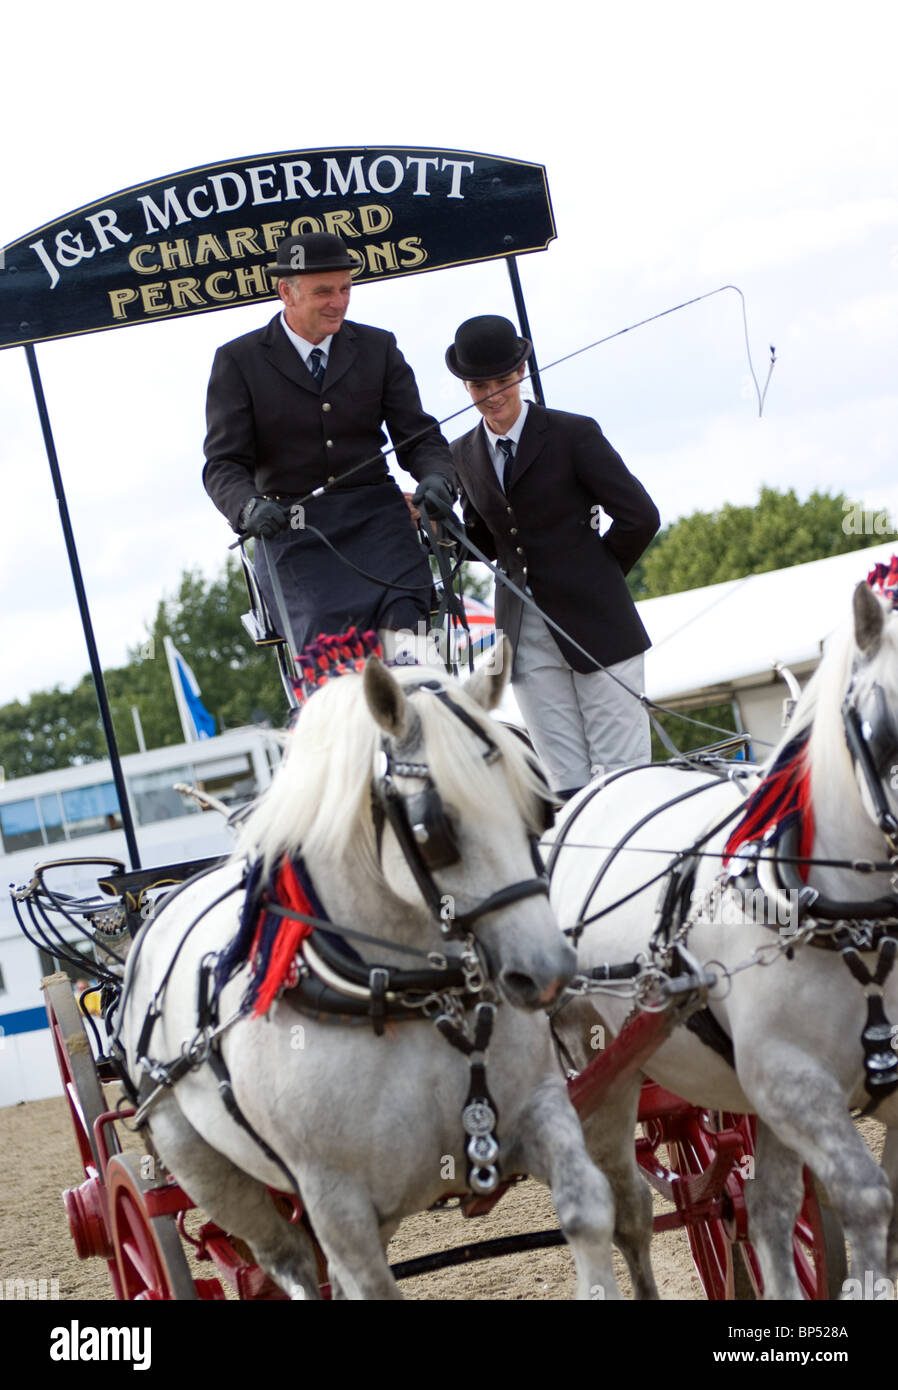 Percharon work horses at the royal festival of the horse Stock Photo